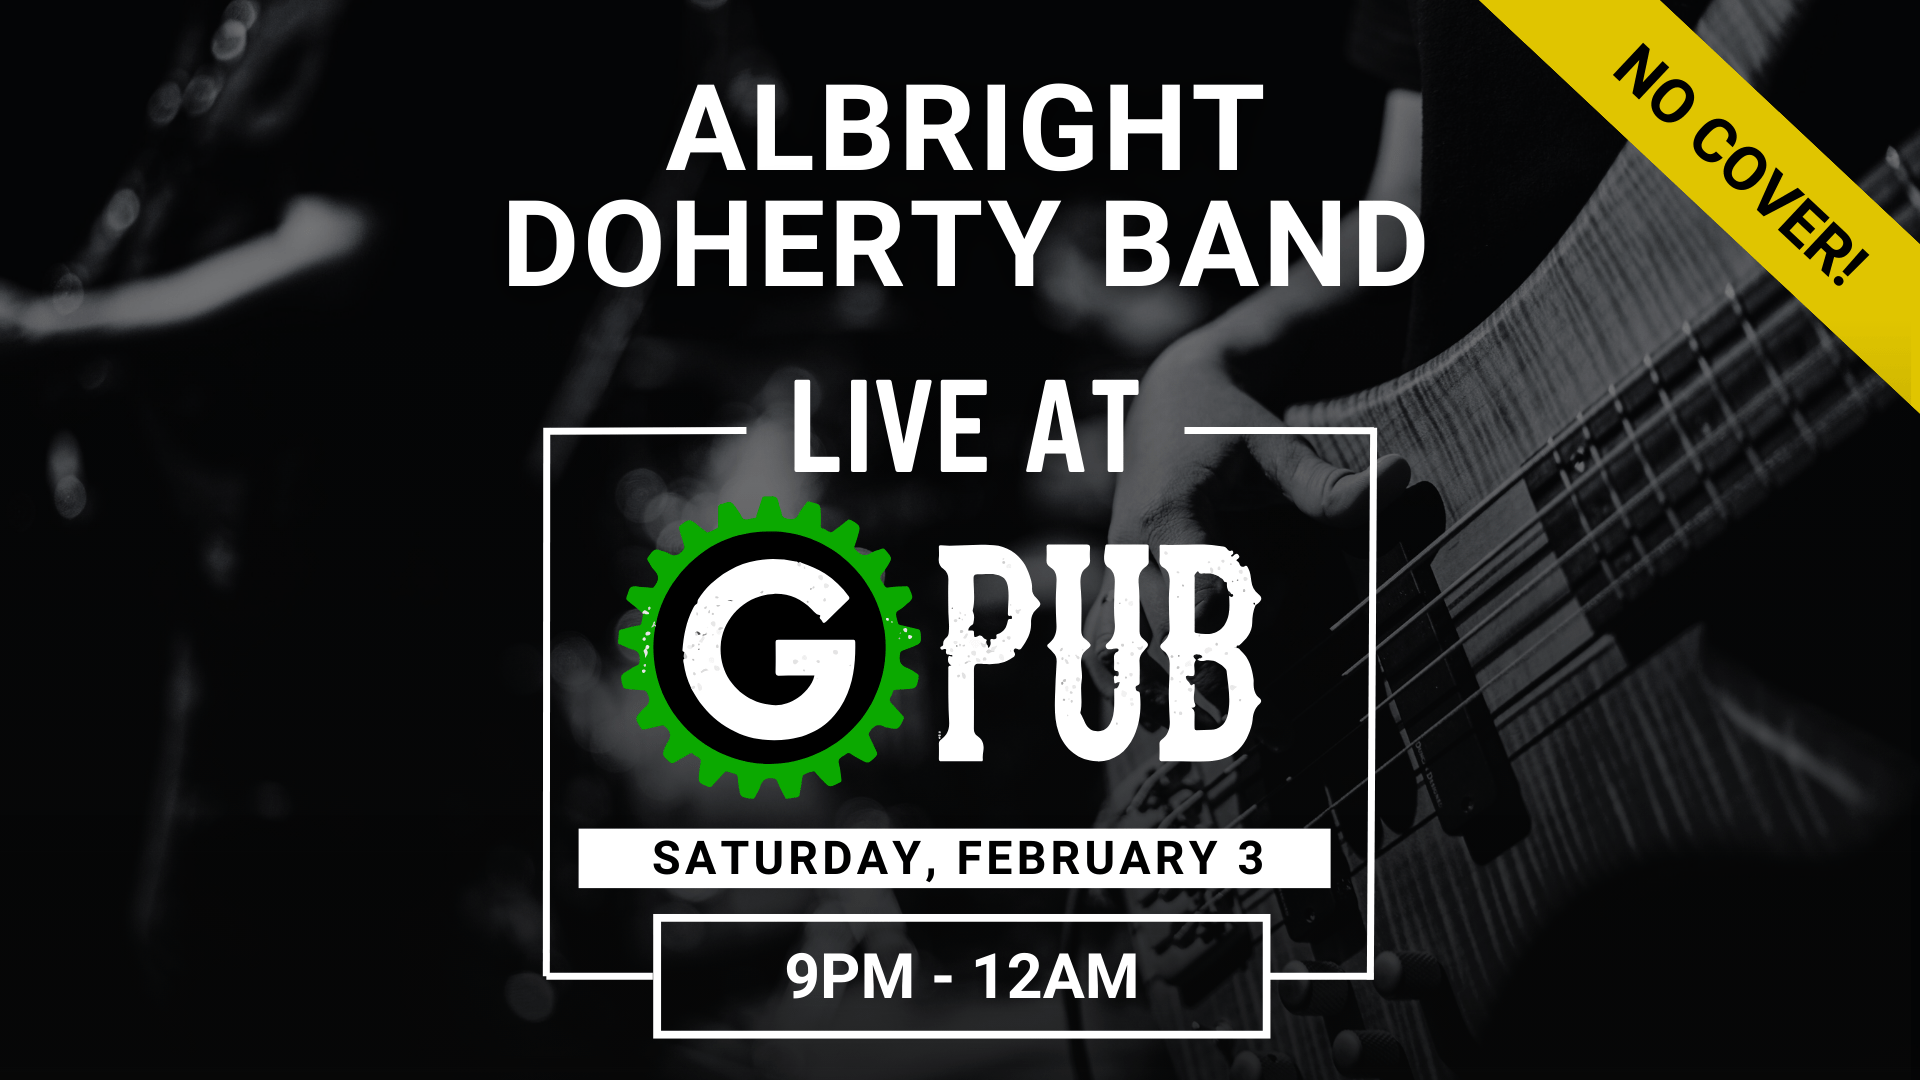 The-Albright-Doherty-Band